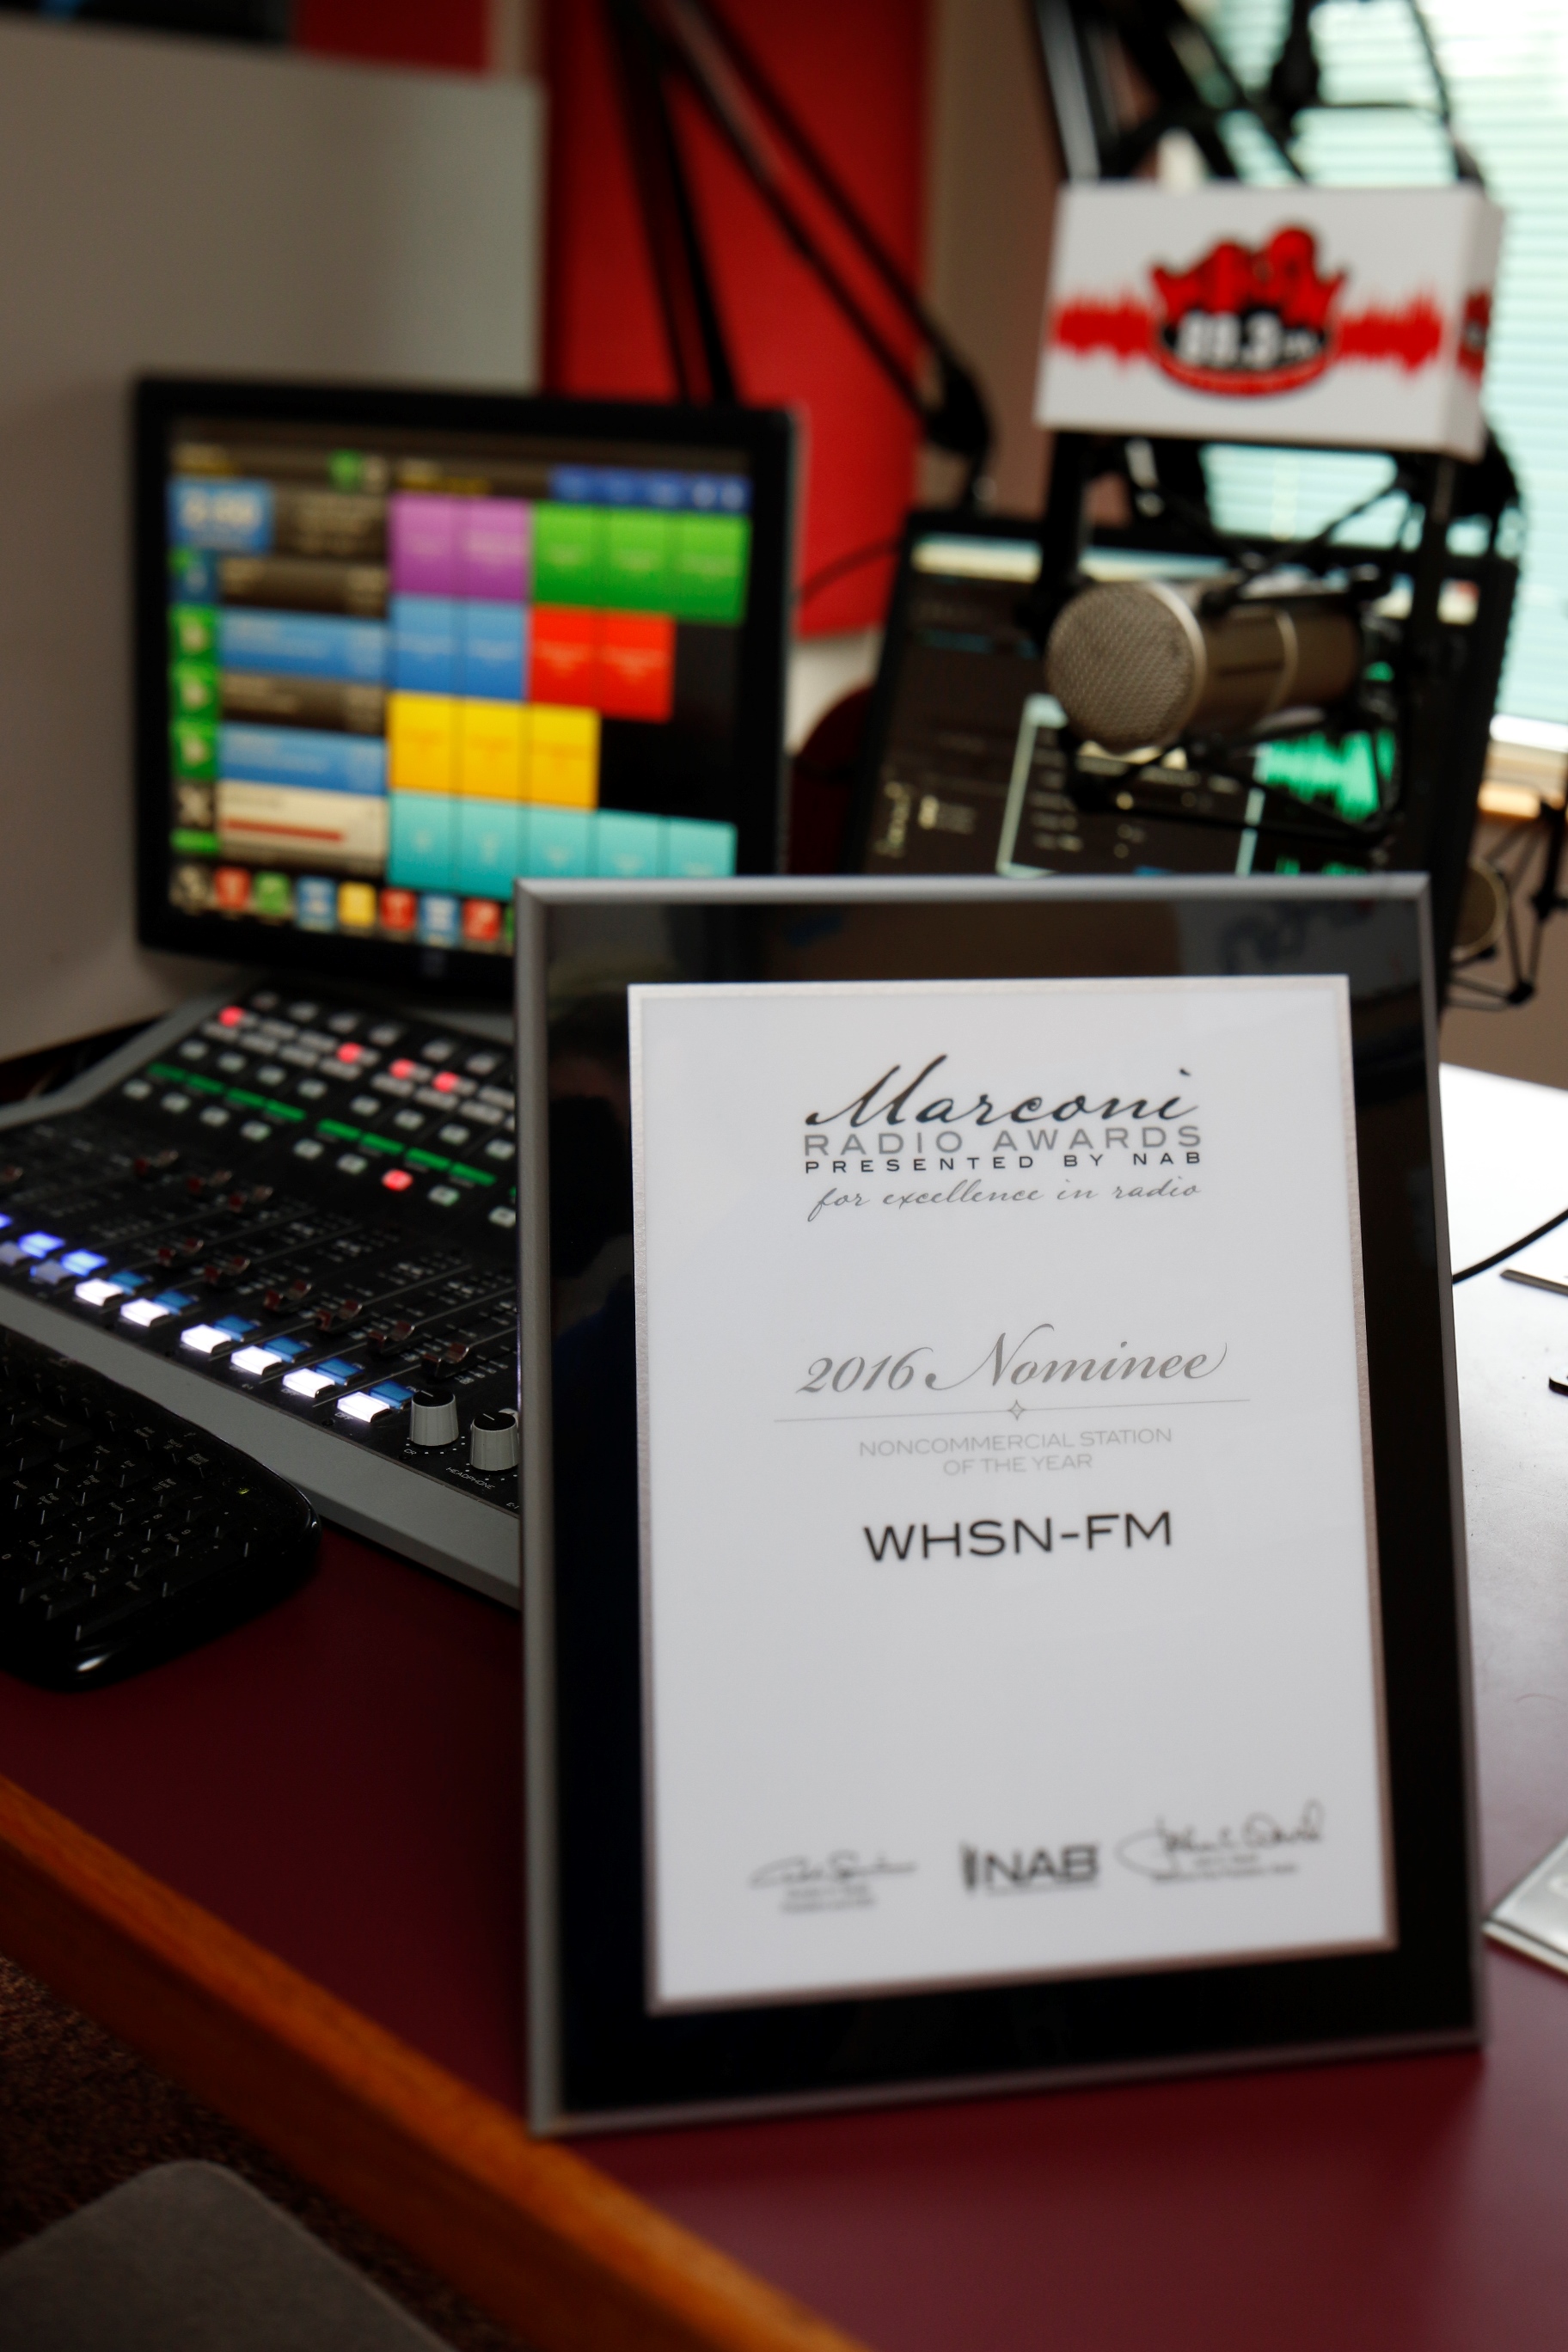 The National Association of Broadcasters (NAB) sent Husson University's New England School of Communications this plaque to honor WHSN's commitment to broadcast excellence.